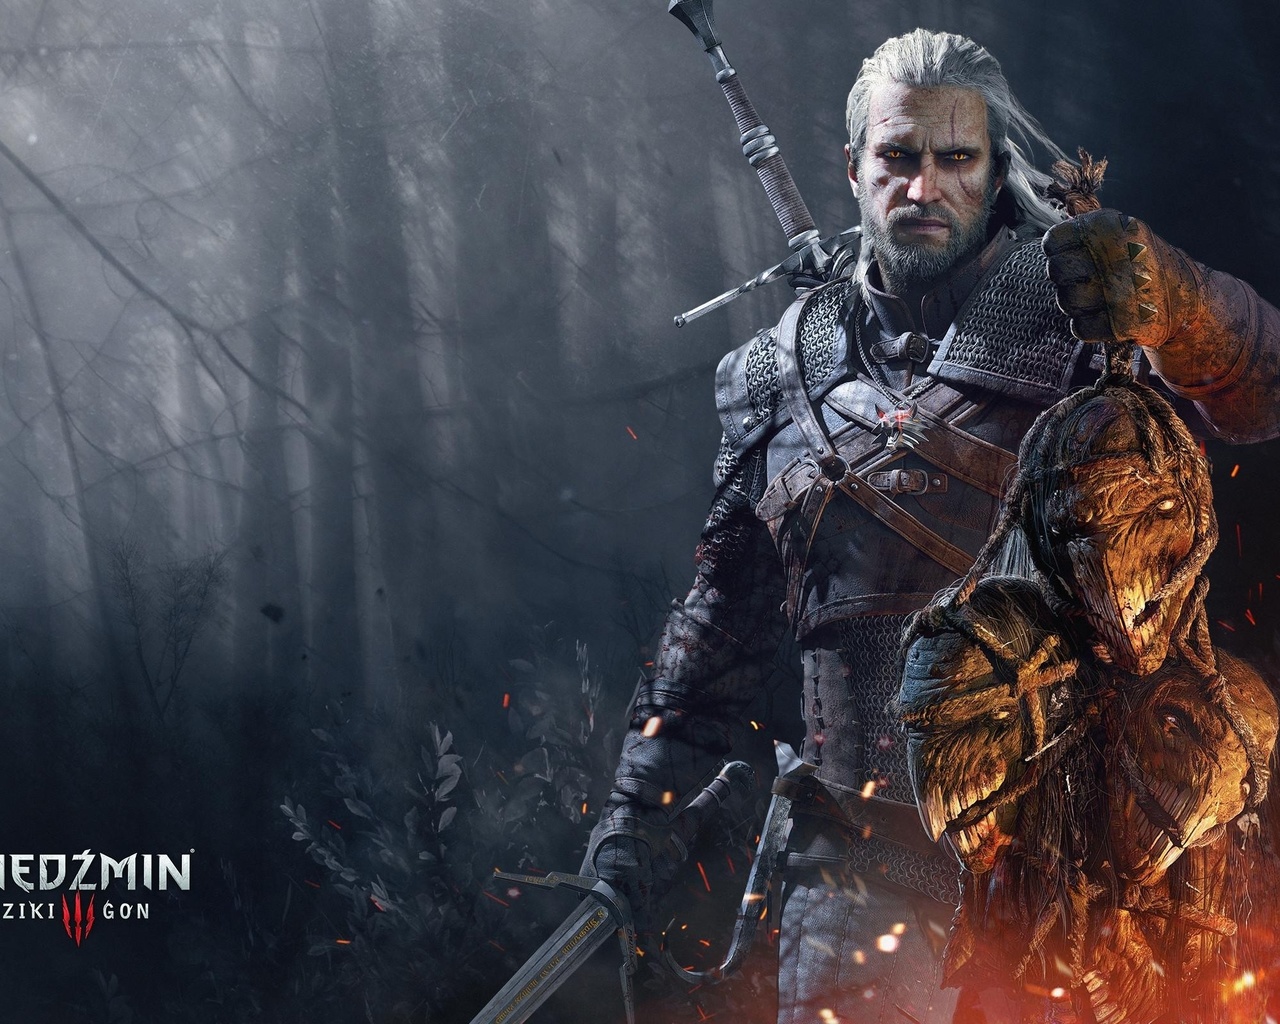  3  , , the wither, the witcher 3 wild hunt